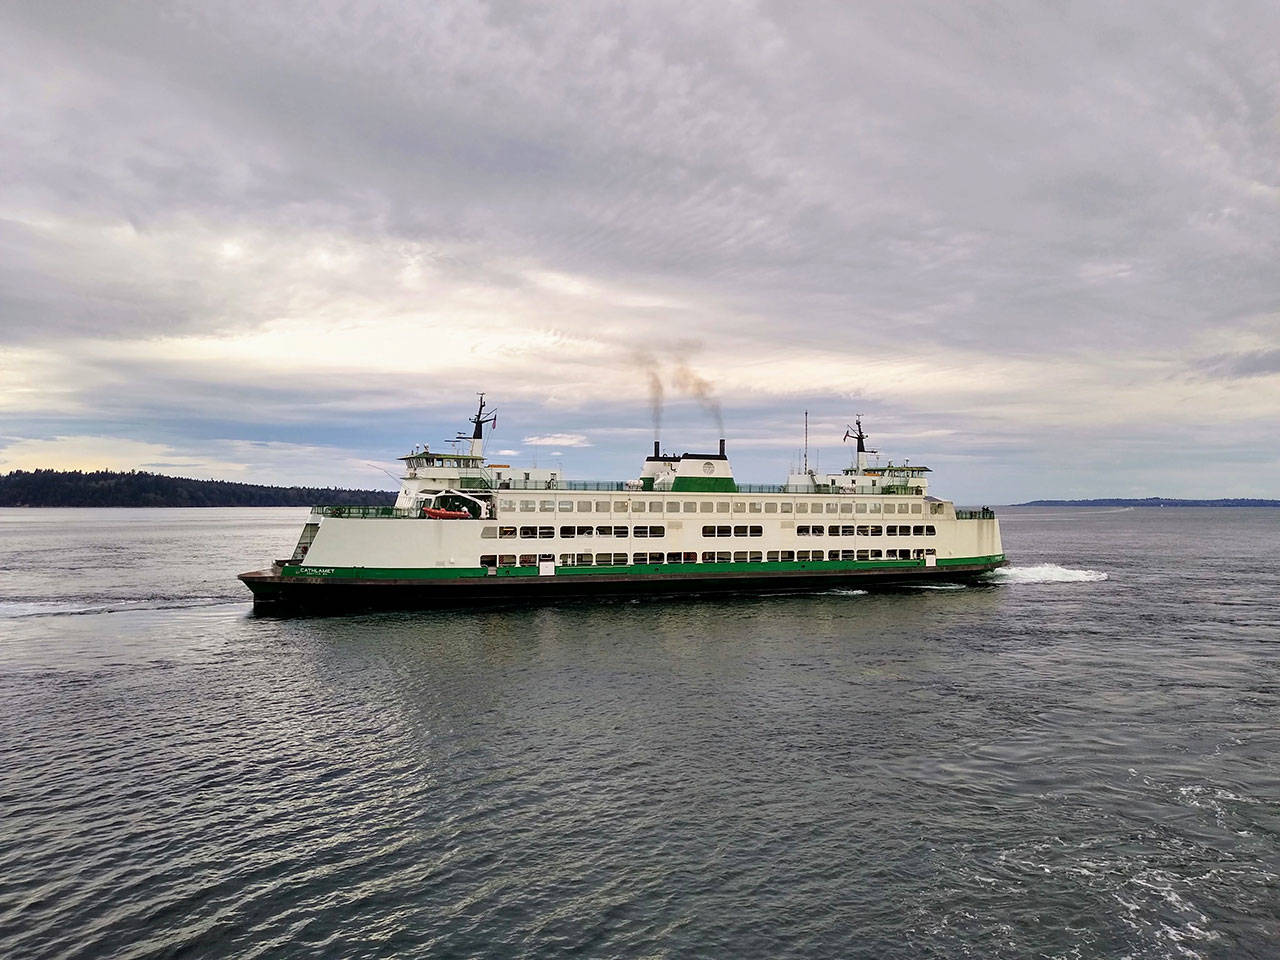 Ridership on Washington State Ferries last year fell to the lowest level since 1975, a decrease of almost 10 million customers in 2020 (Paul Rowley/Staff Photo).